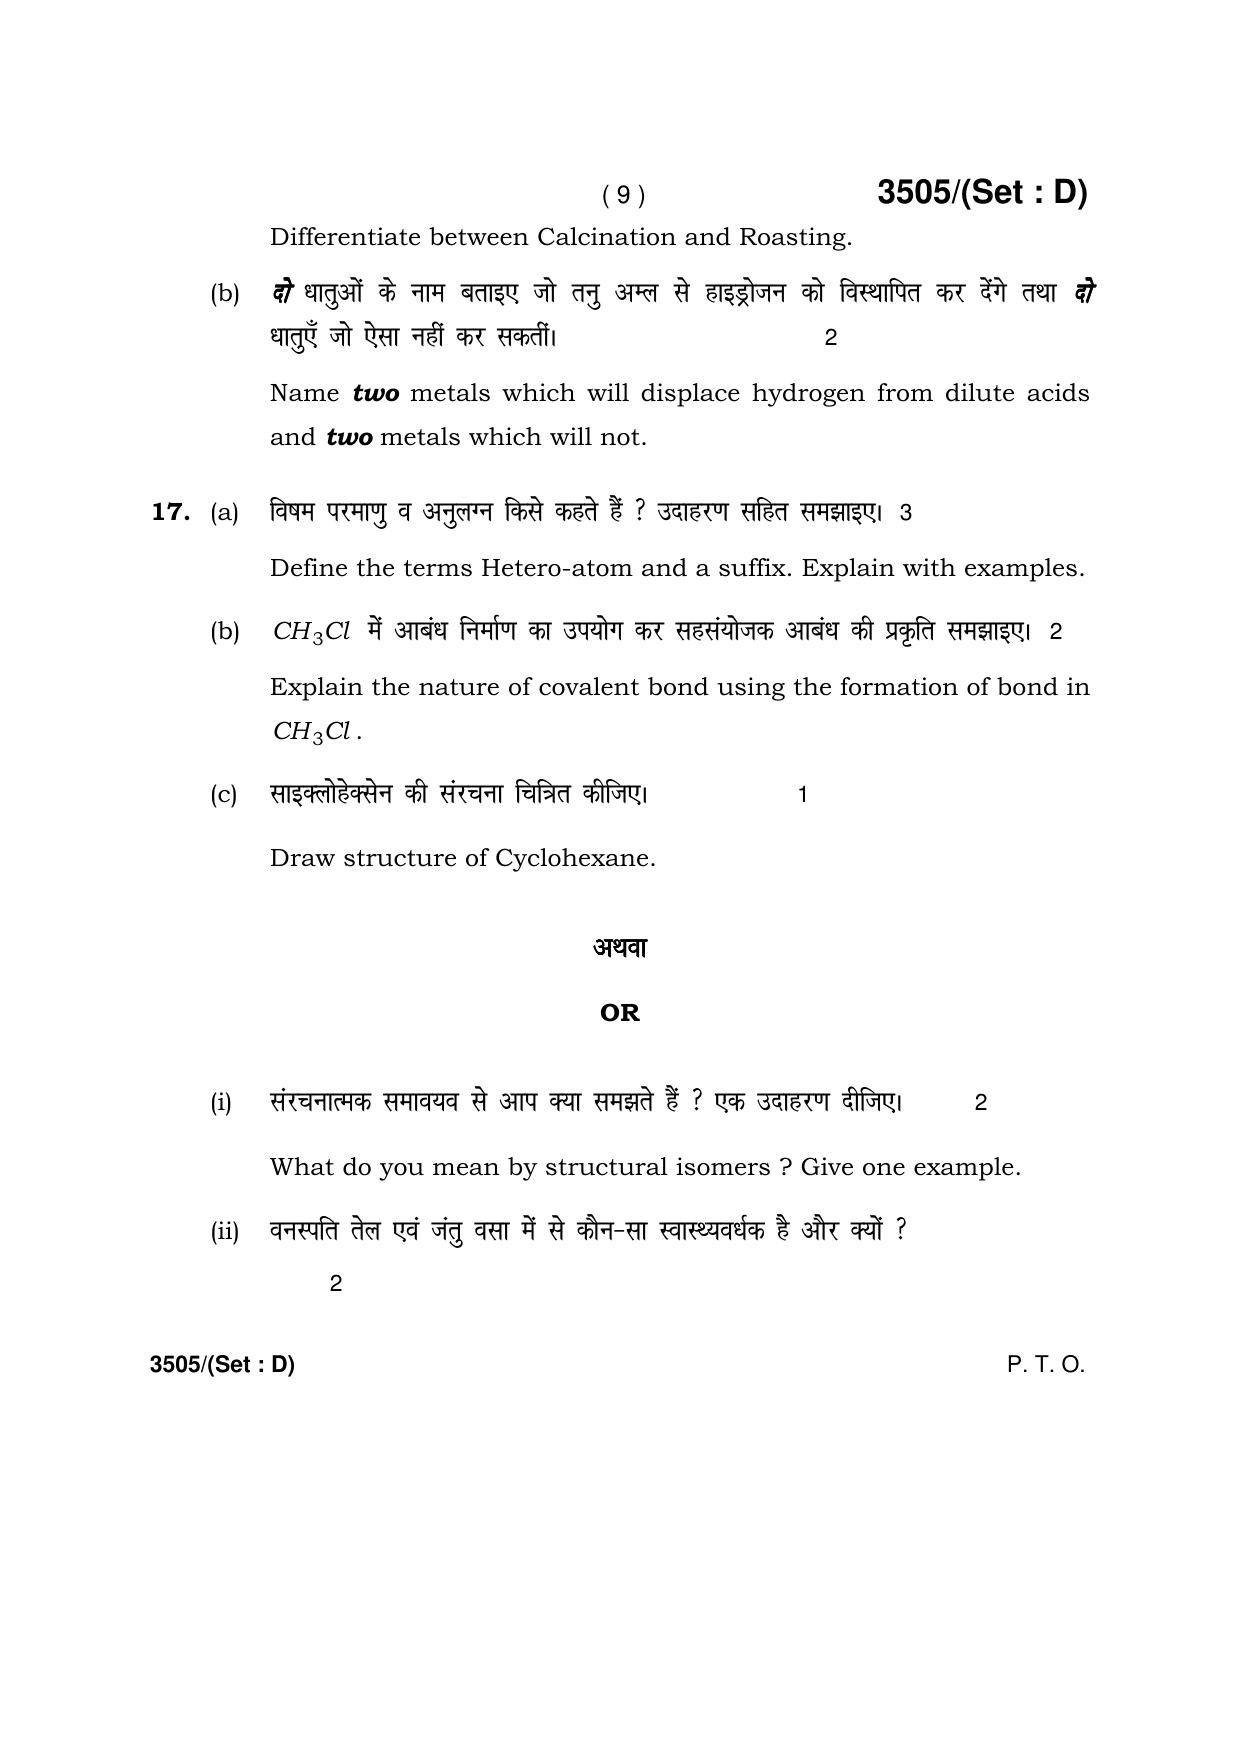 Haryana Board HBSE Class 10 Science -D 2018 Question Paper - Page 9